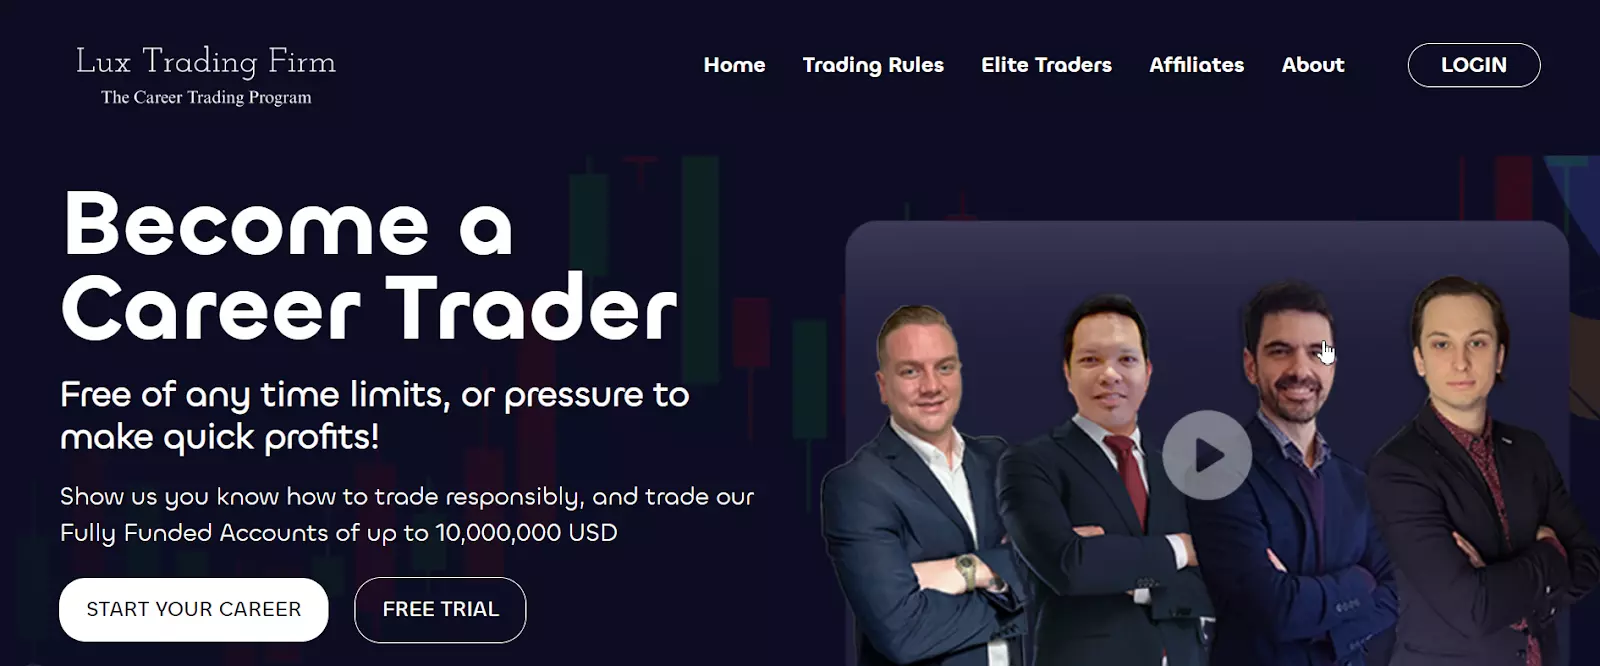 Review of Lux Trading Firm - Ilmainen kokeiluversio